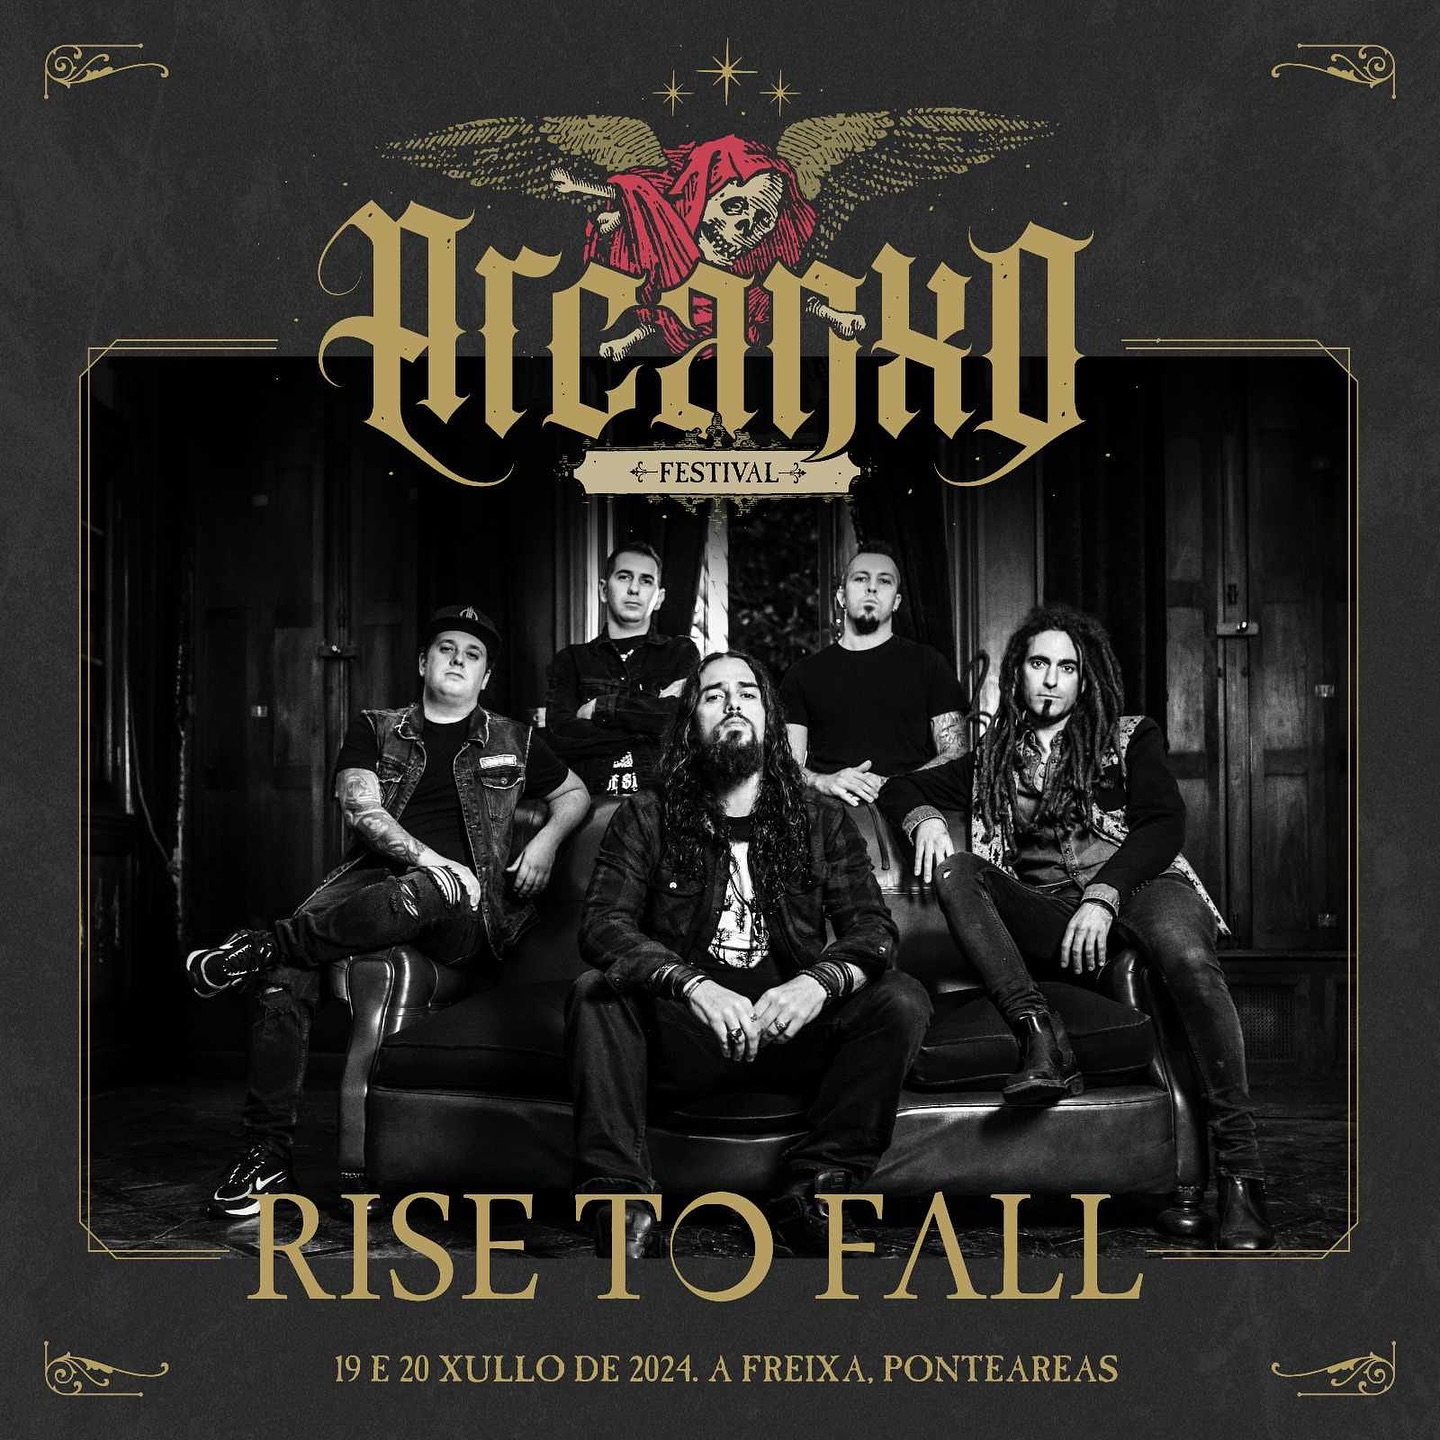 RISE TO FALL - ARCANXO METAL FEST